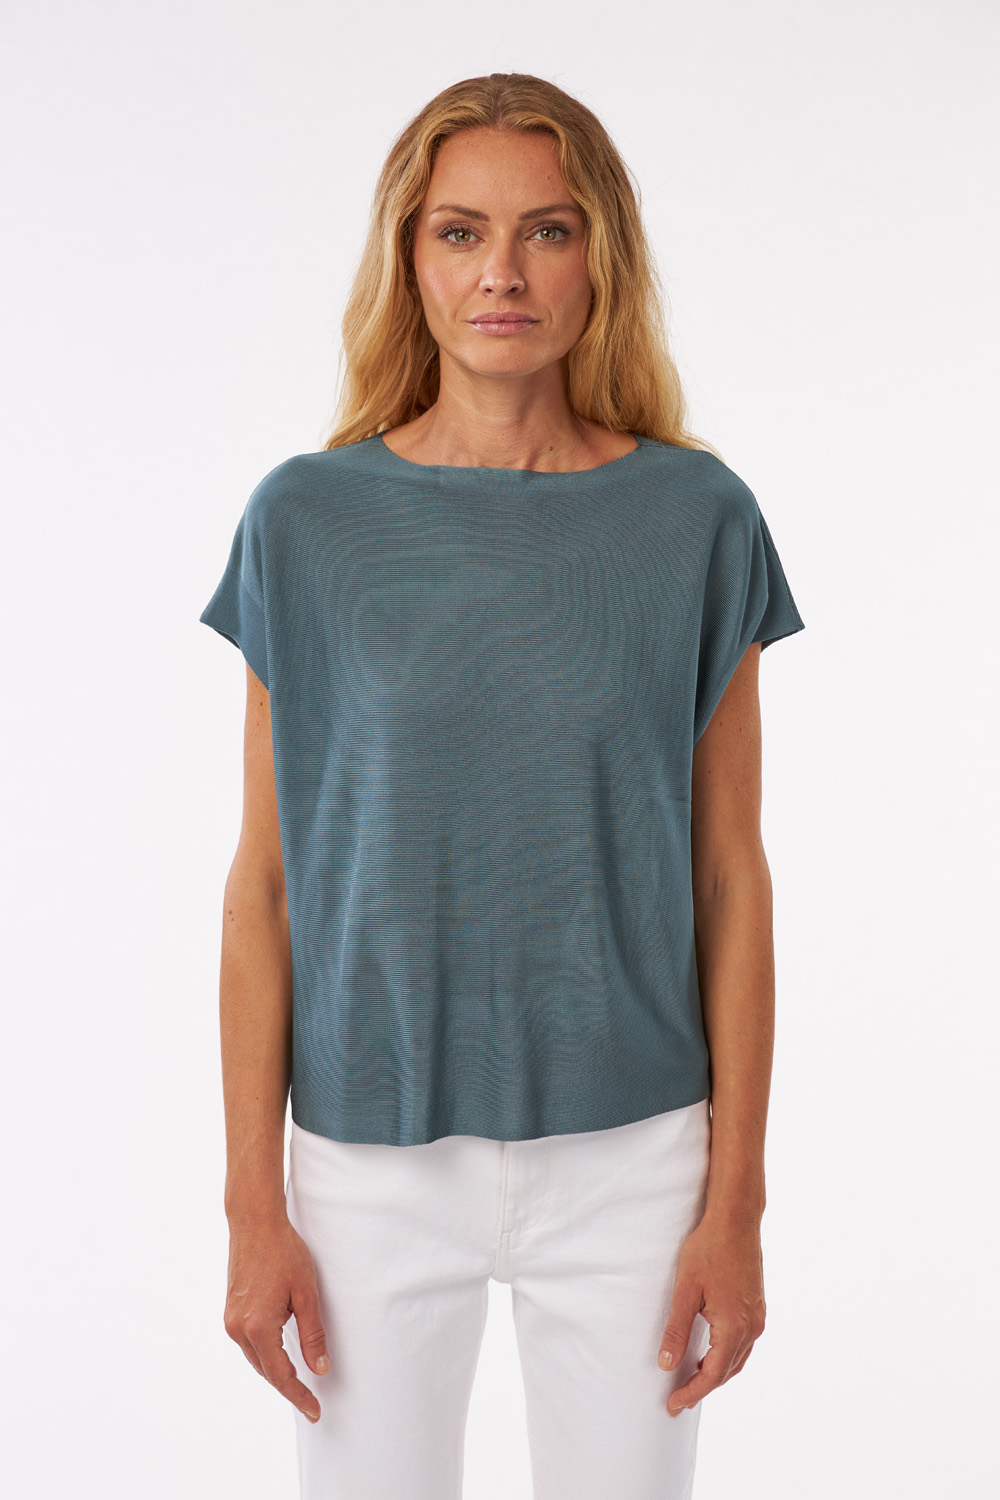 boat neck sweater in 100% viscose, short sleeves